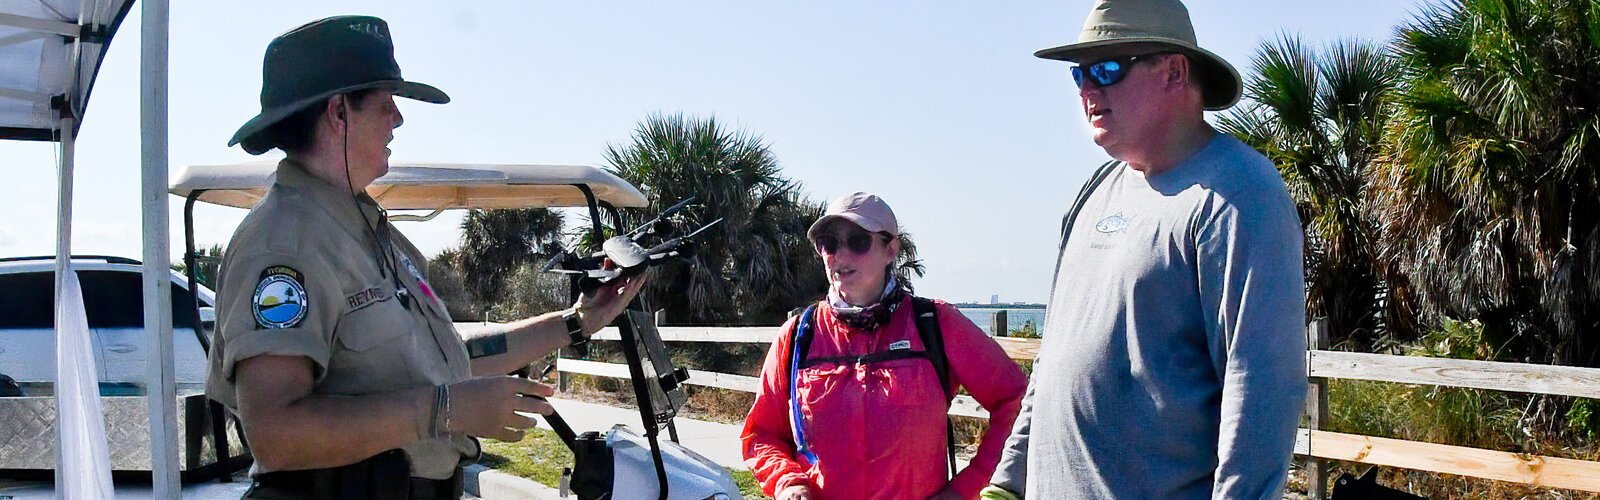 A drone was among the surprising items found on the beach and brought back with bags of litter during the International Coastal Cleanup Day event at Honeymoon Island State Park on September 16th.